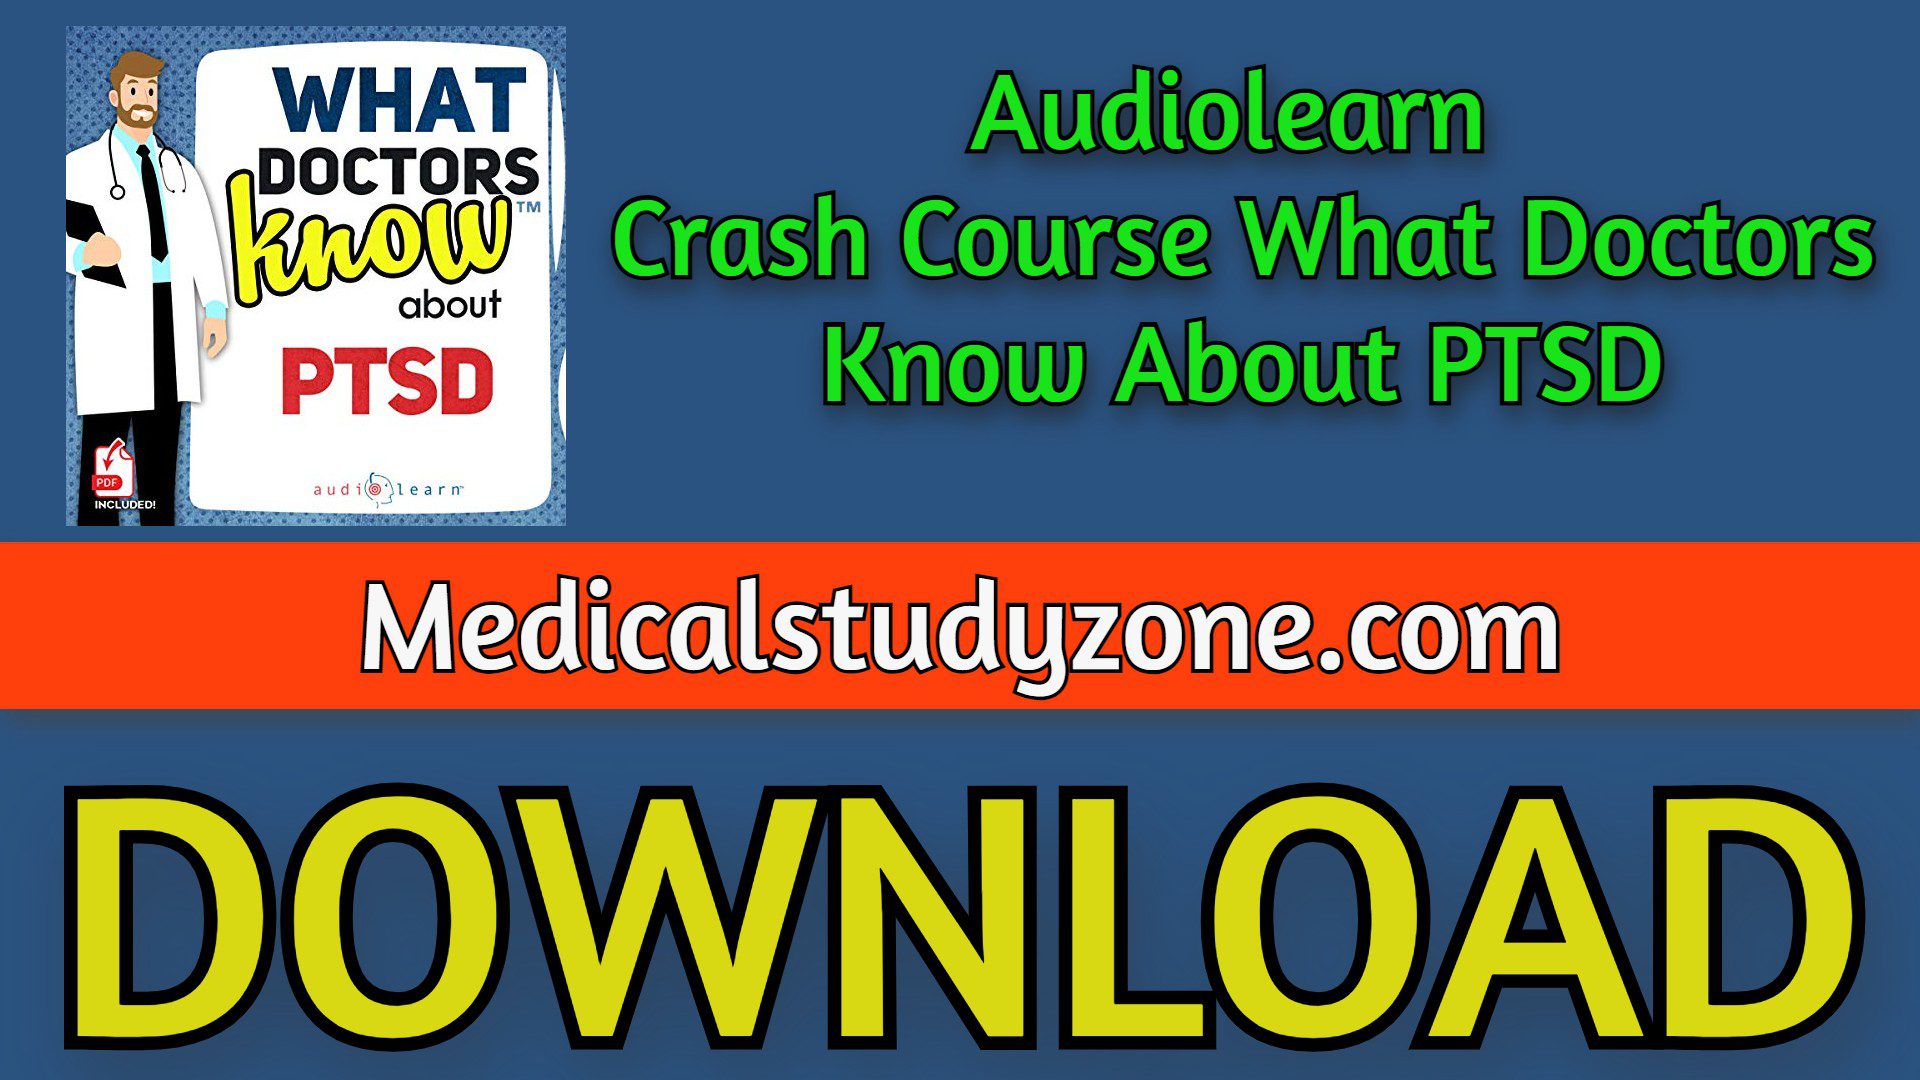 Audiolearn Crash Course What Doctors Know About PTSD 2021 Free Download